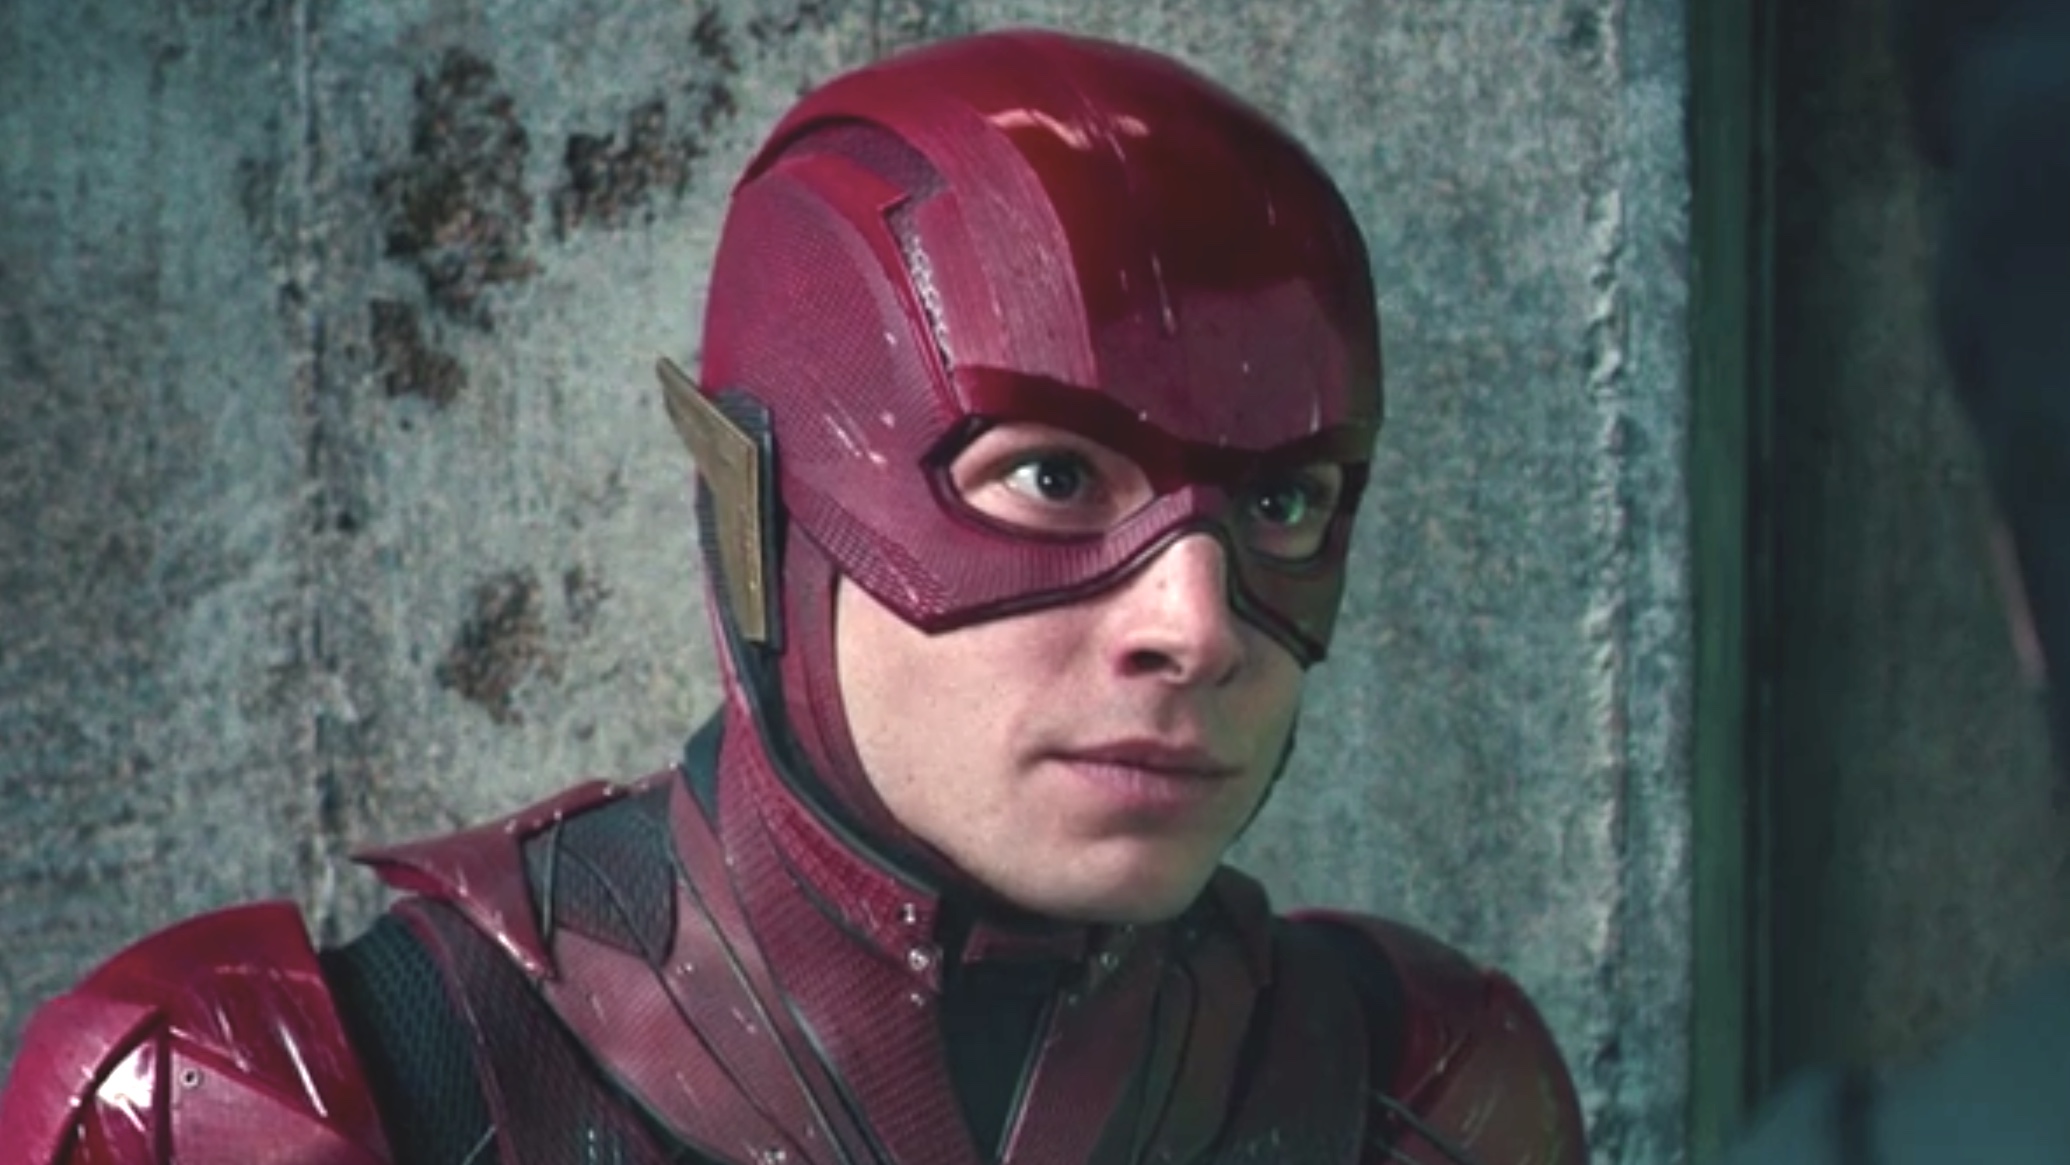 New The Flash Trailer Release Date Set in Teaser Video